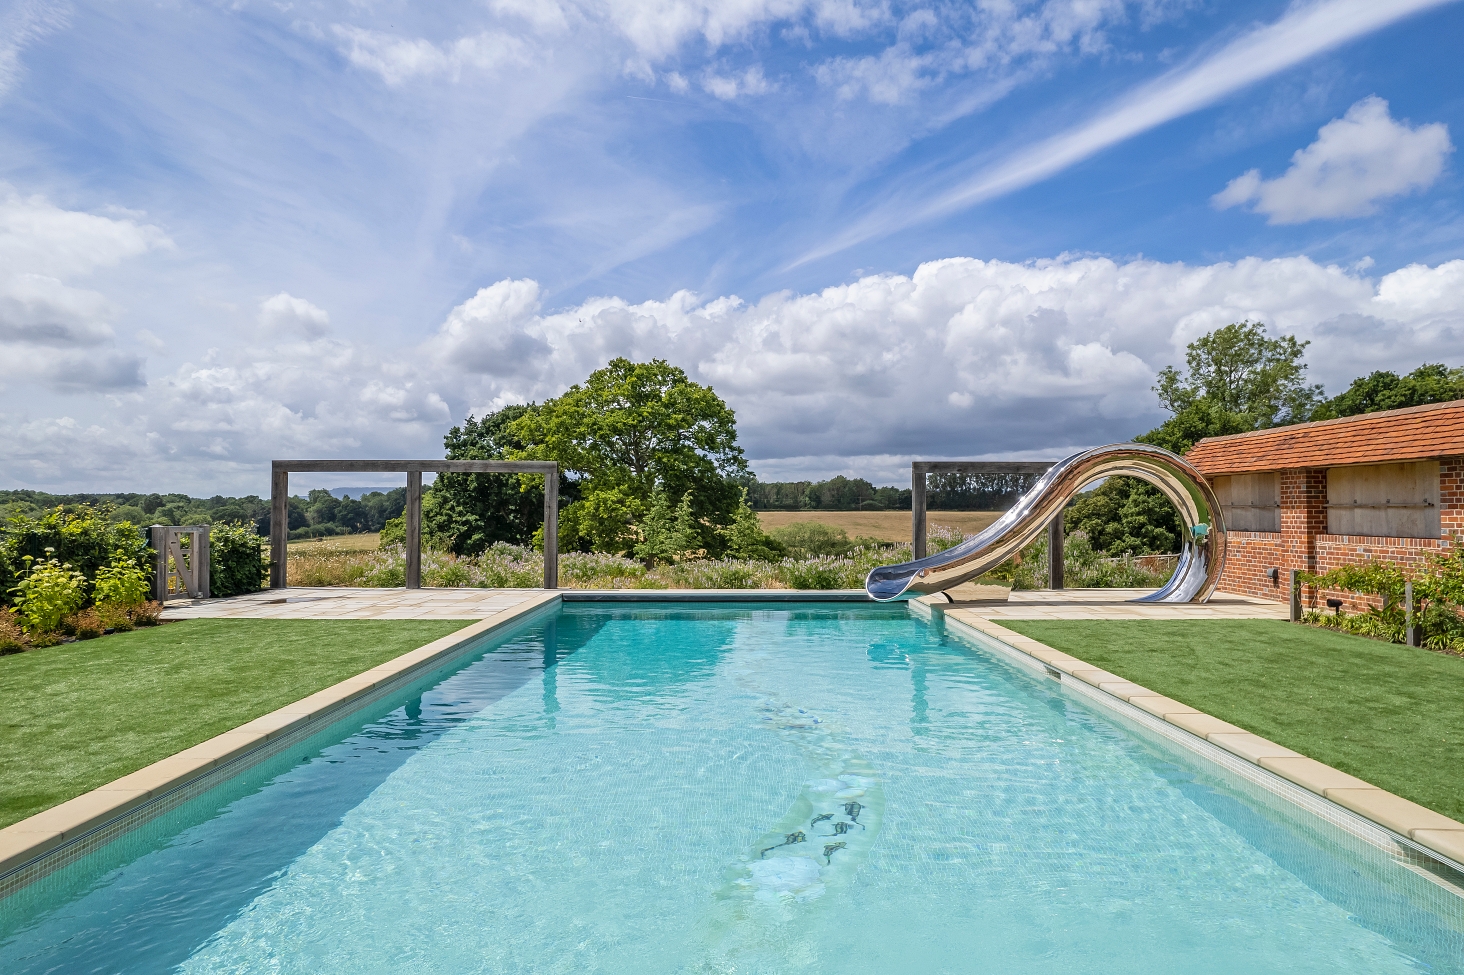 Panoramic image of outdoor swimming pool, with waha slide to the right, surronded by English countryside